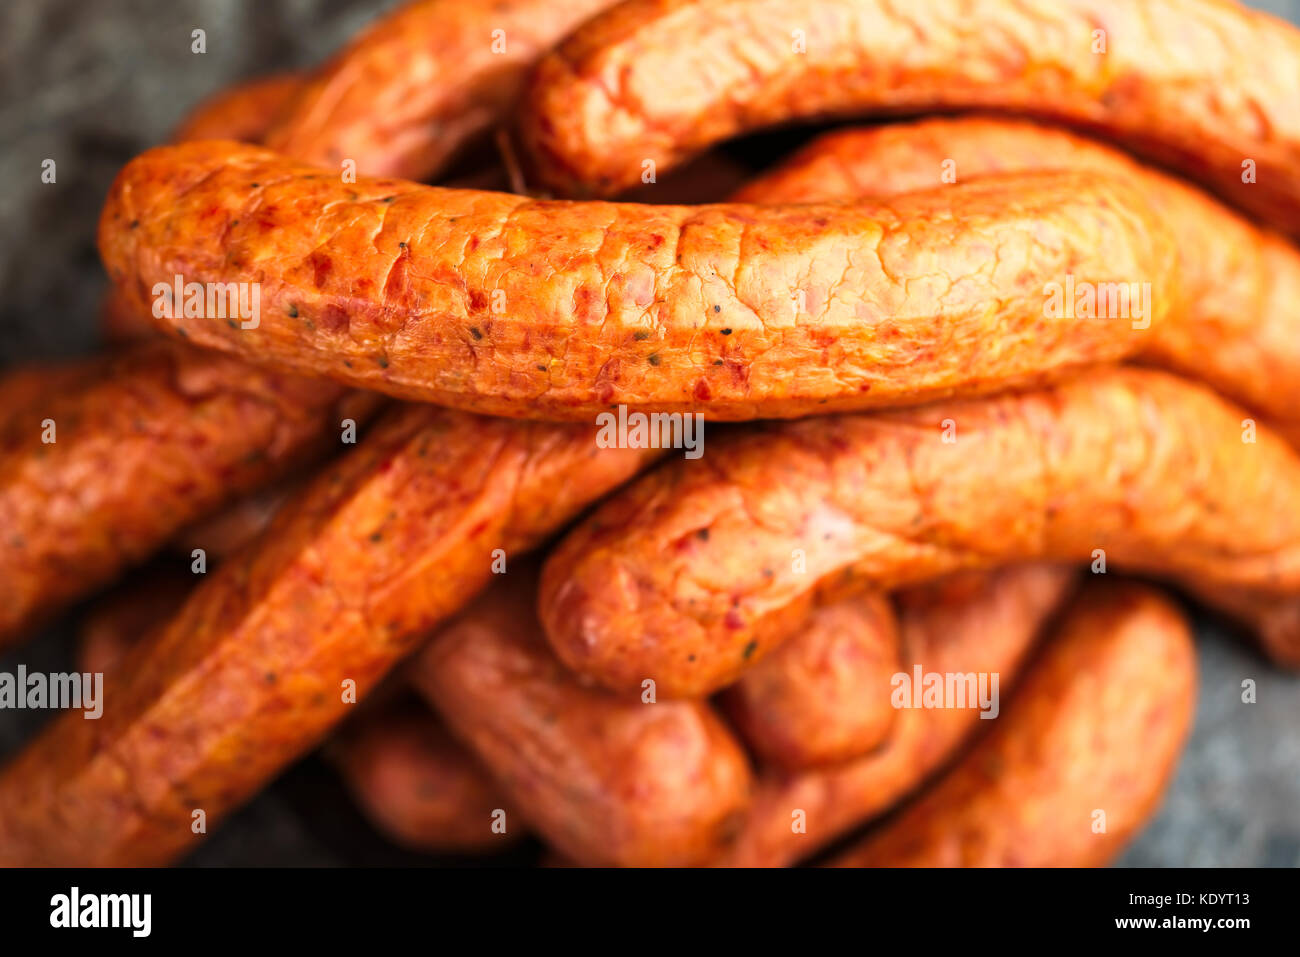 Large pile of deliciously smoked handmade Swedish Isterband sausages with natural casing. Stock Photo